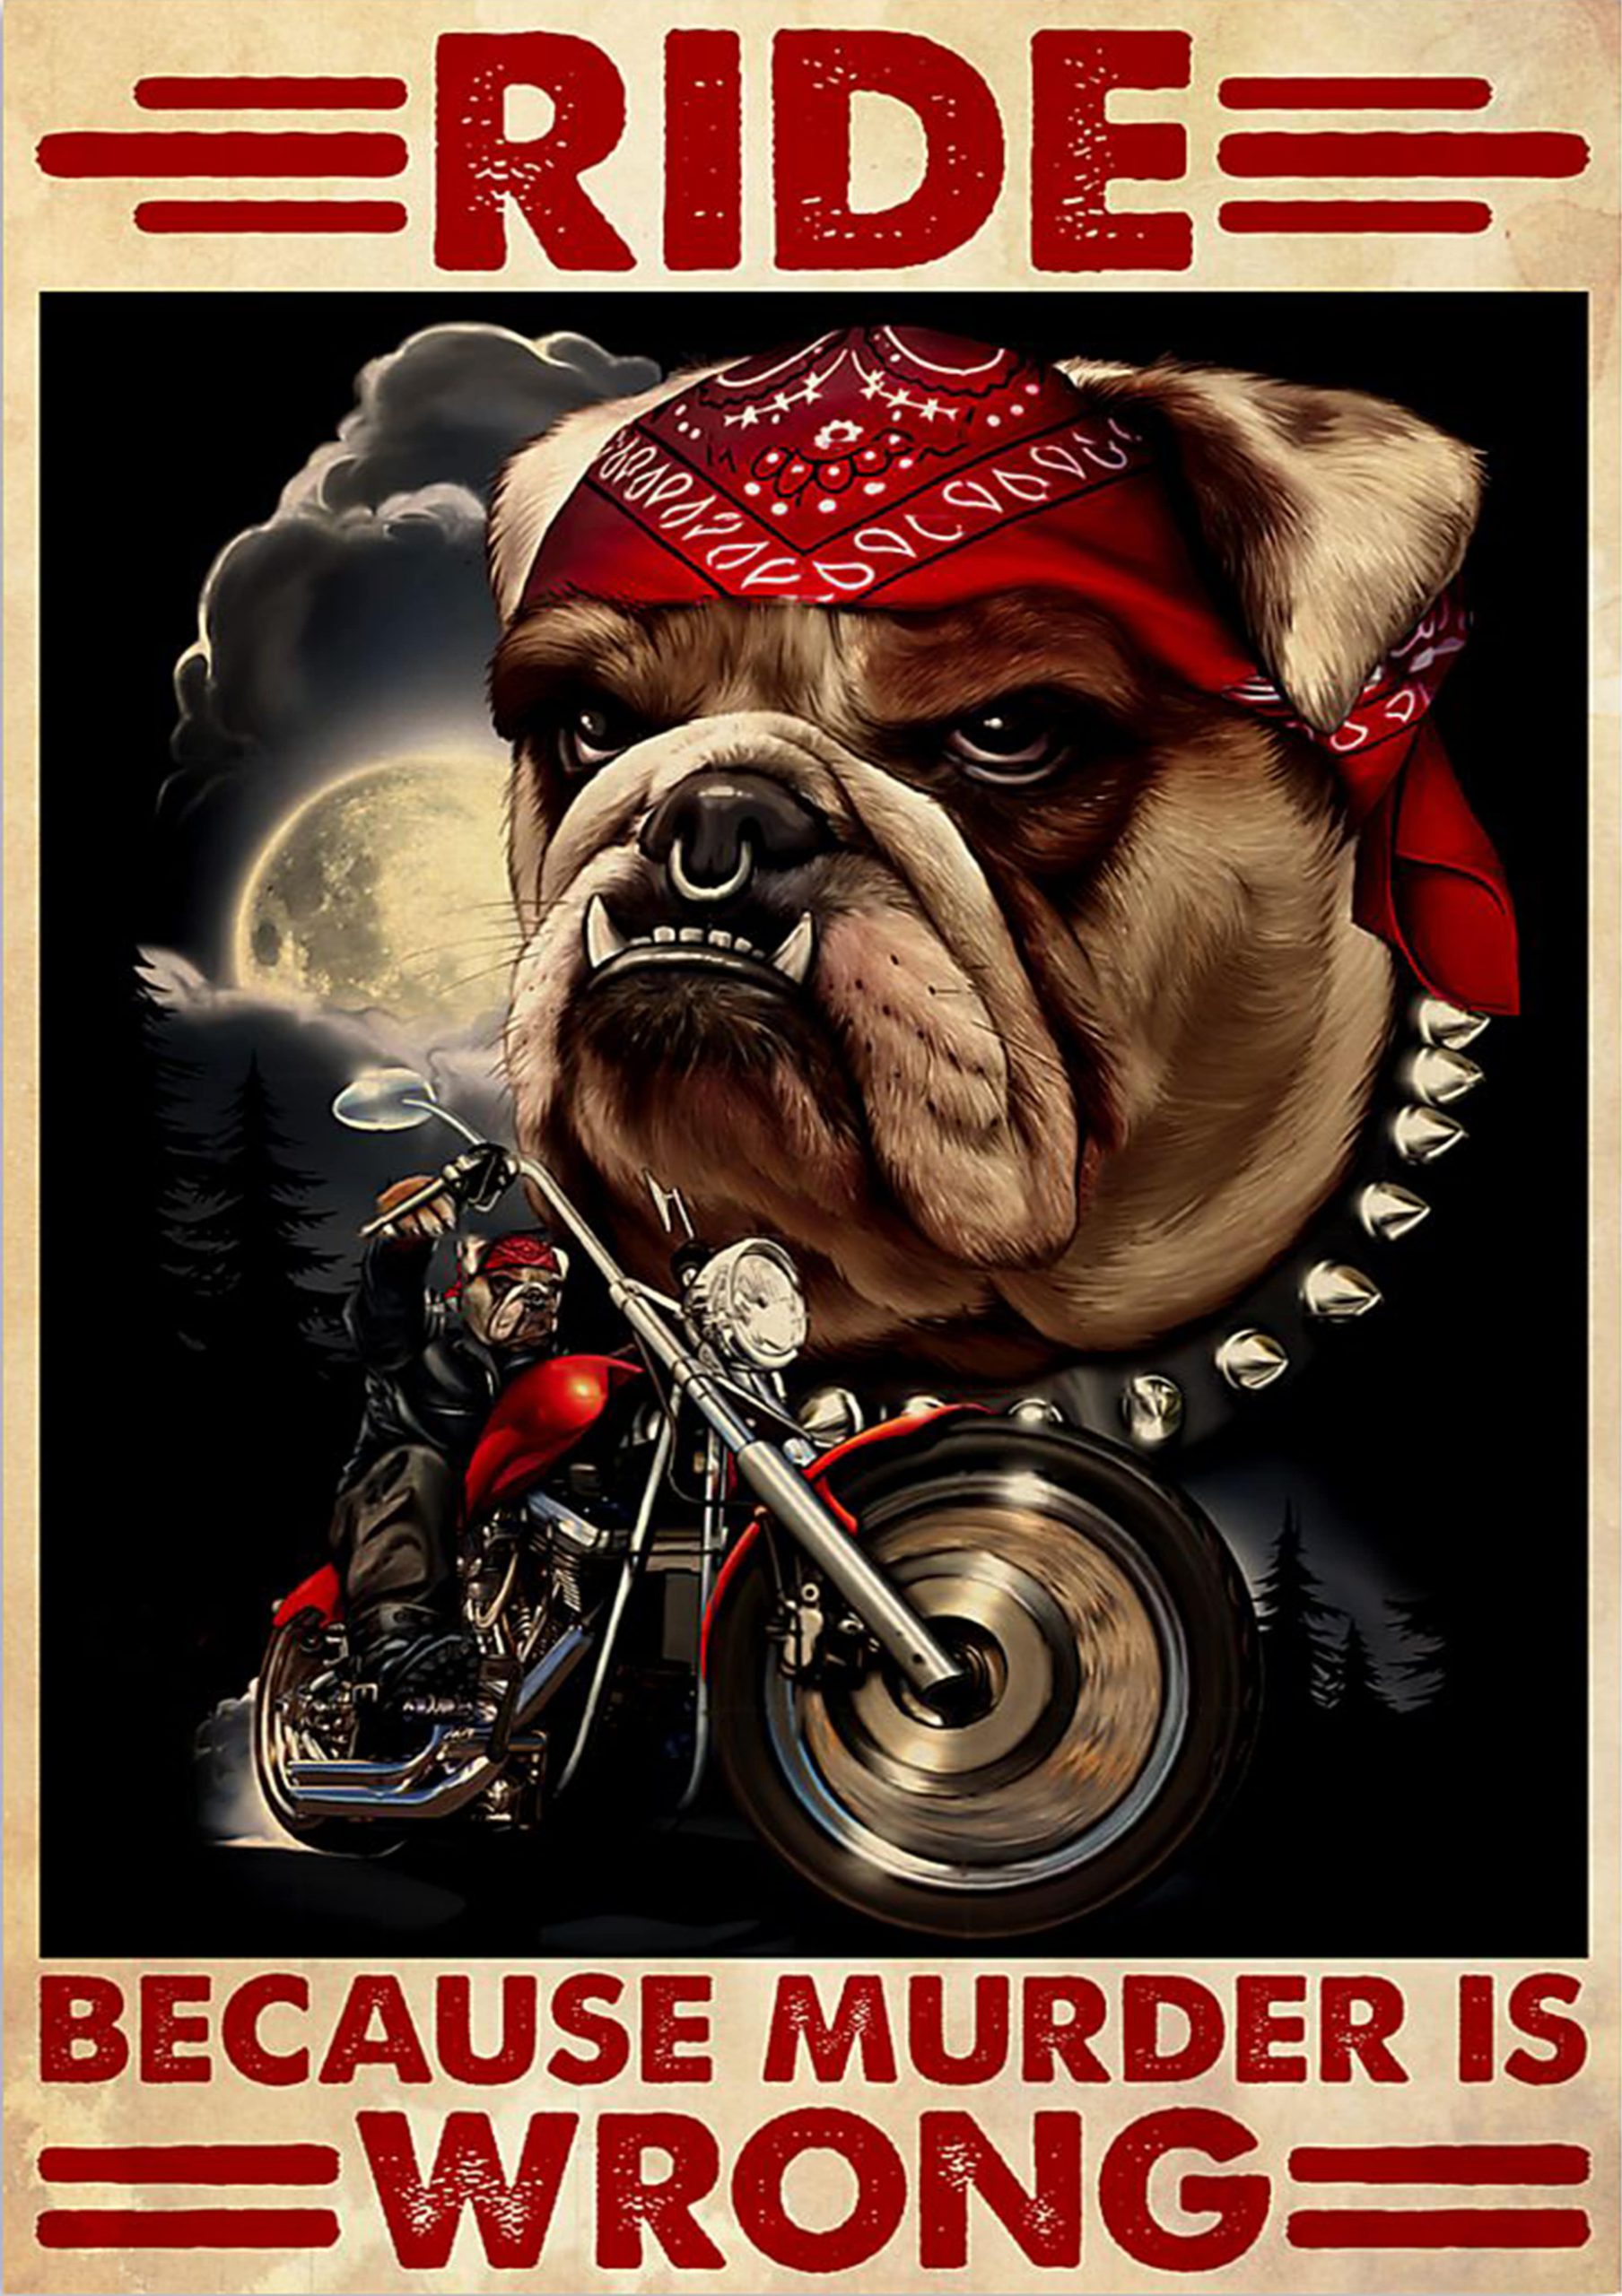 vintage bull dog motorcycles ride because murder is wrong poster 1 - Copy (3)